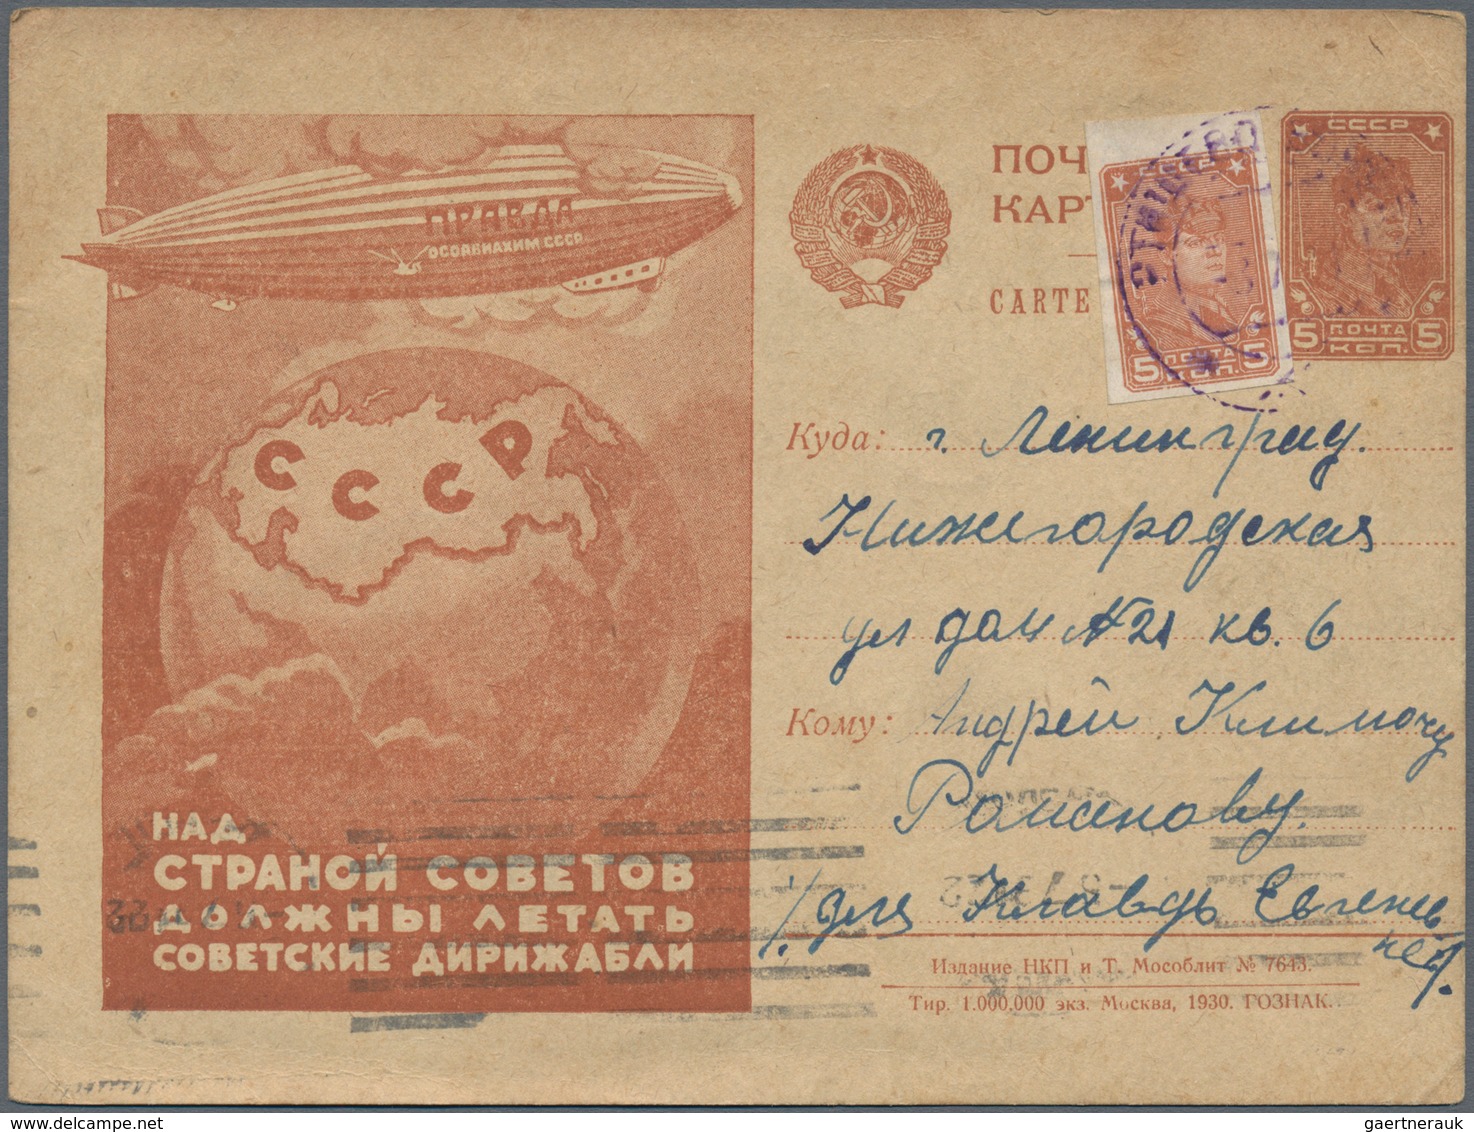 Sowjetunion - Ganzsachen: 1930/32, 7 different used picture postcards with motive Zeppelin, one card